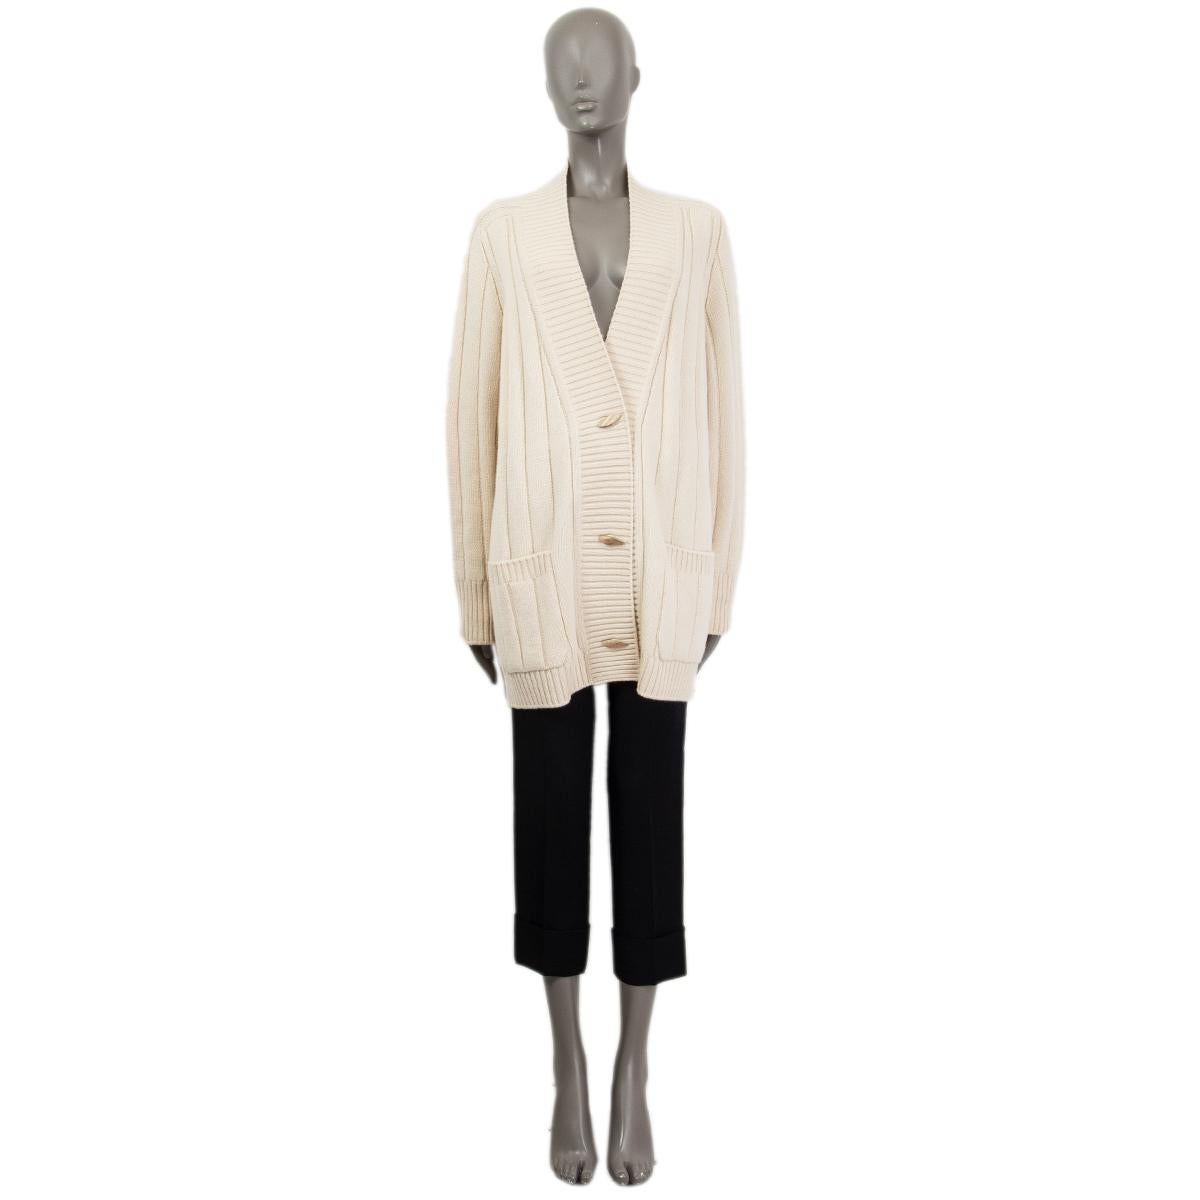 100% authentic Loro Piana 2021 'Duca D'Aosta' cardigan in beige baby cashmere (100%). Features long raglan sleeves (sleeve measurements taken from the neck) and two patch pockets on the front. Opens with three beige wood toggles on the front.